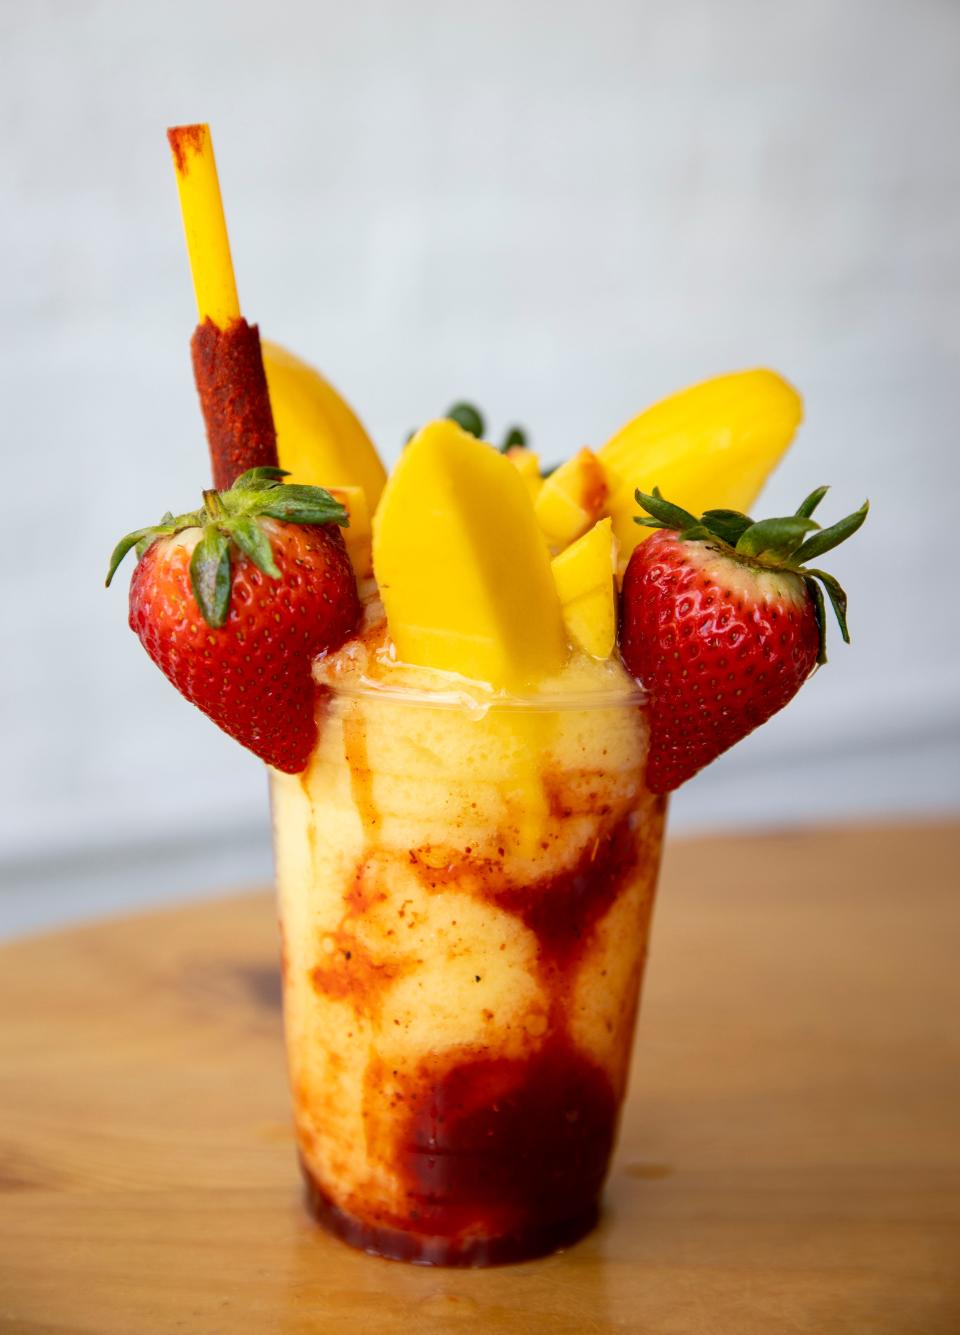 The mango mix drink is served with mangos, strawberries and chamoy at La Cazuela Mexican Restaurant in Independence, Ore.